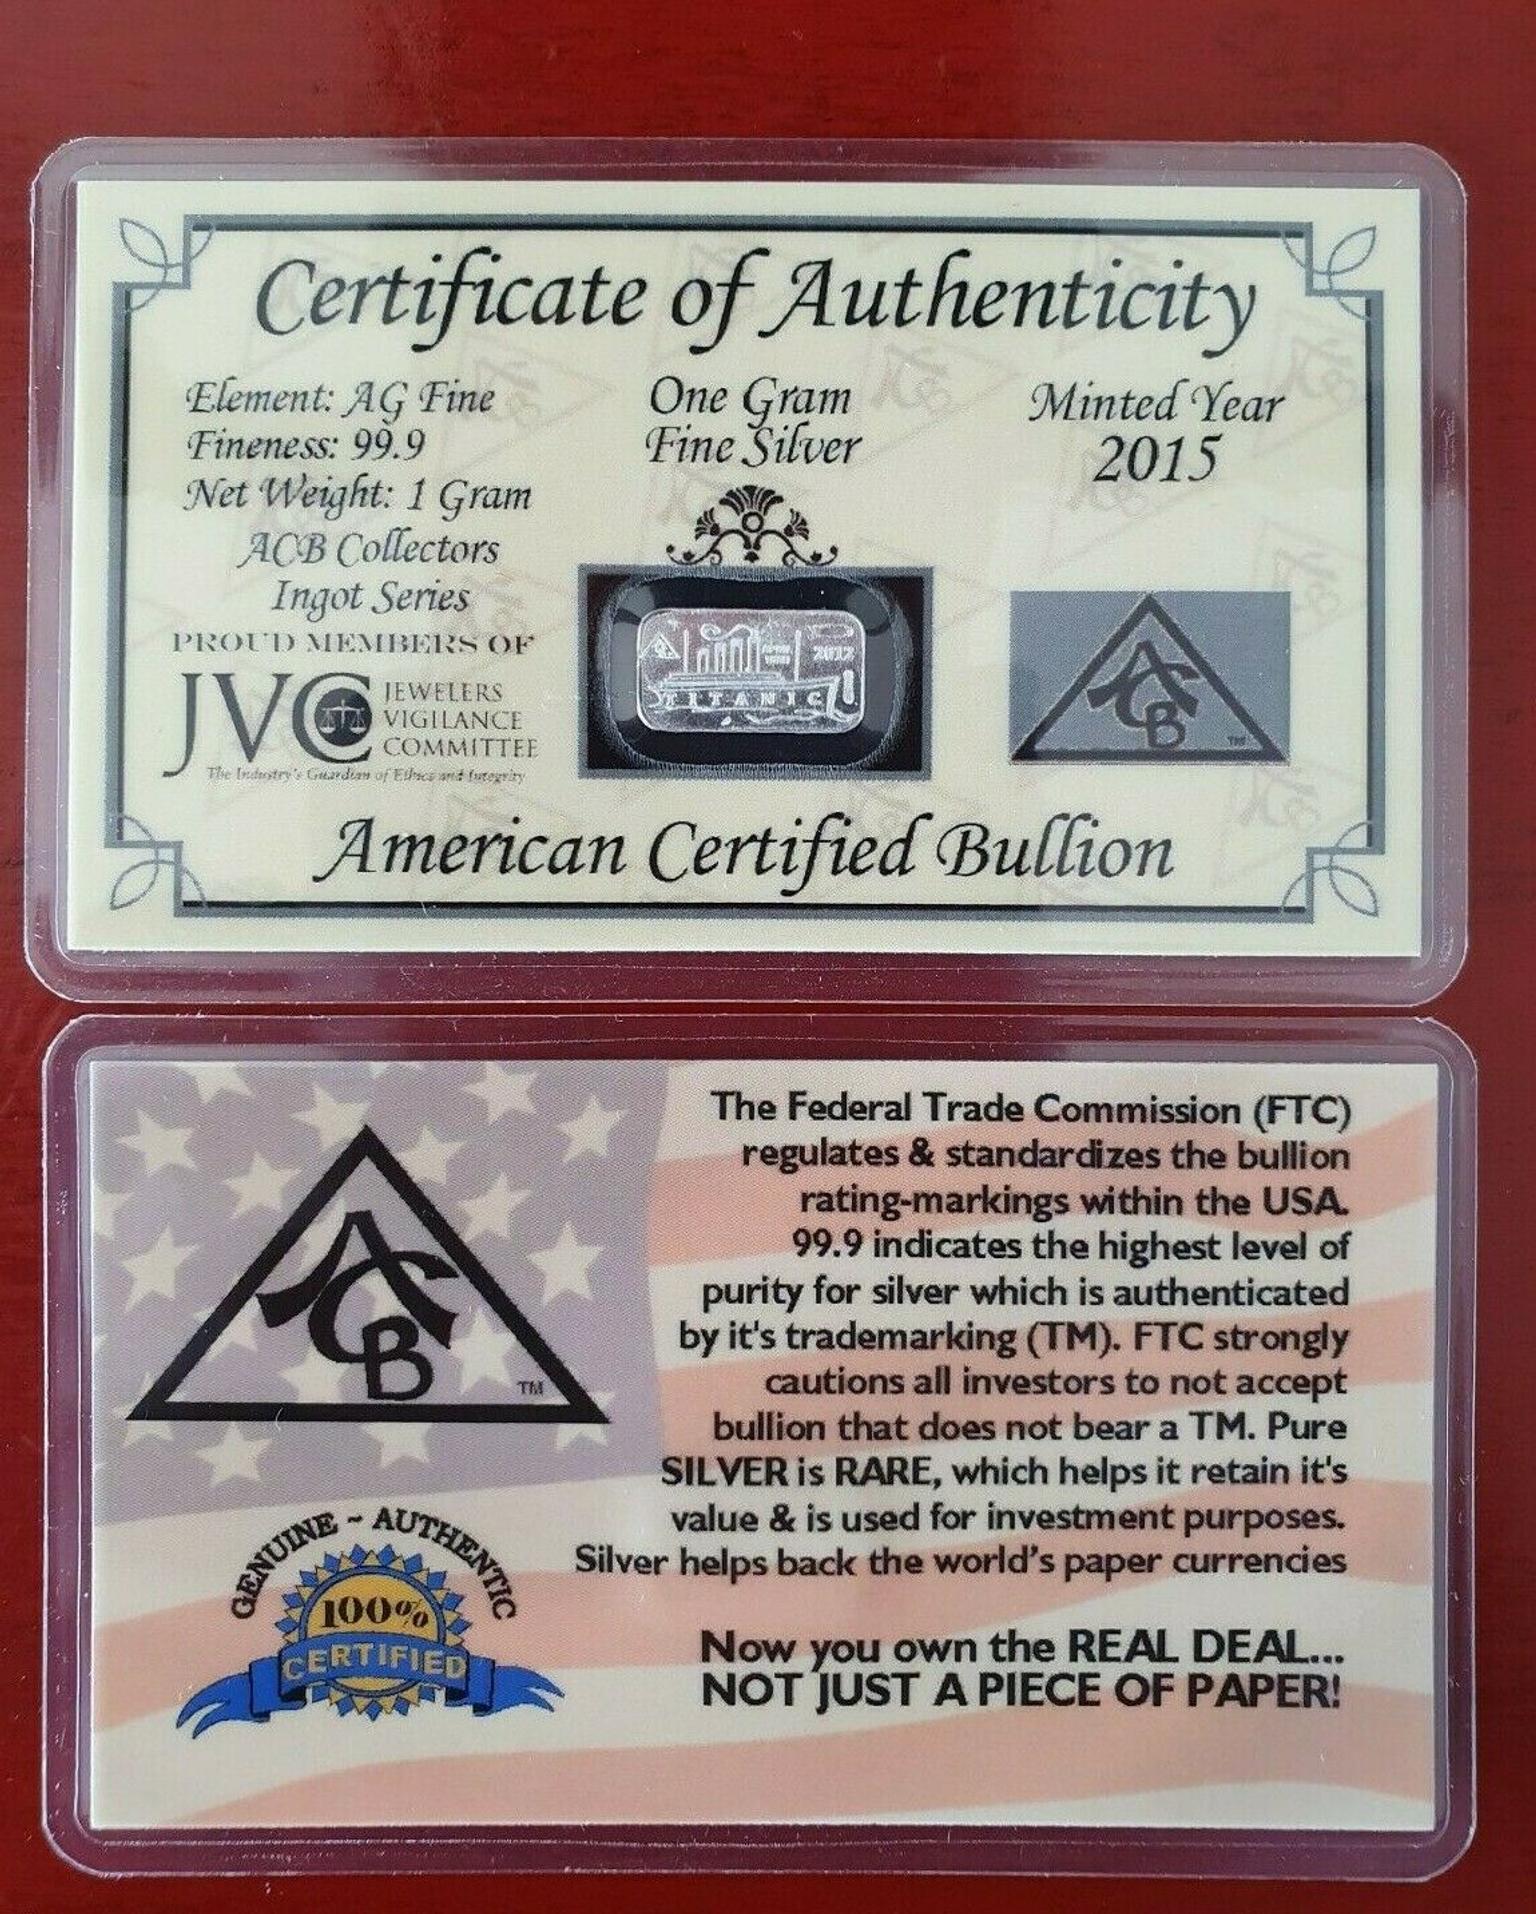 x5 of ACB Silver 1 Gram AG Bar 99.9 Fine > Certificate Authenticity Great Gift ! 